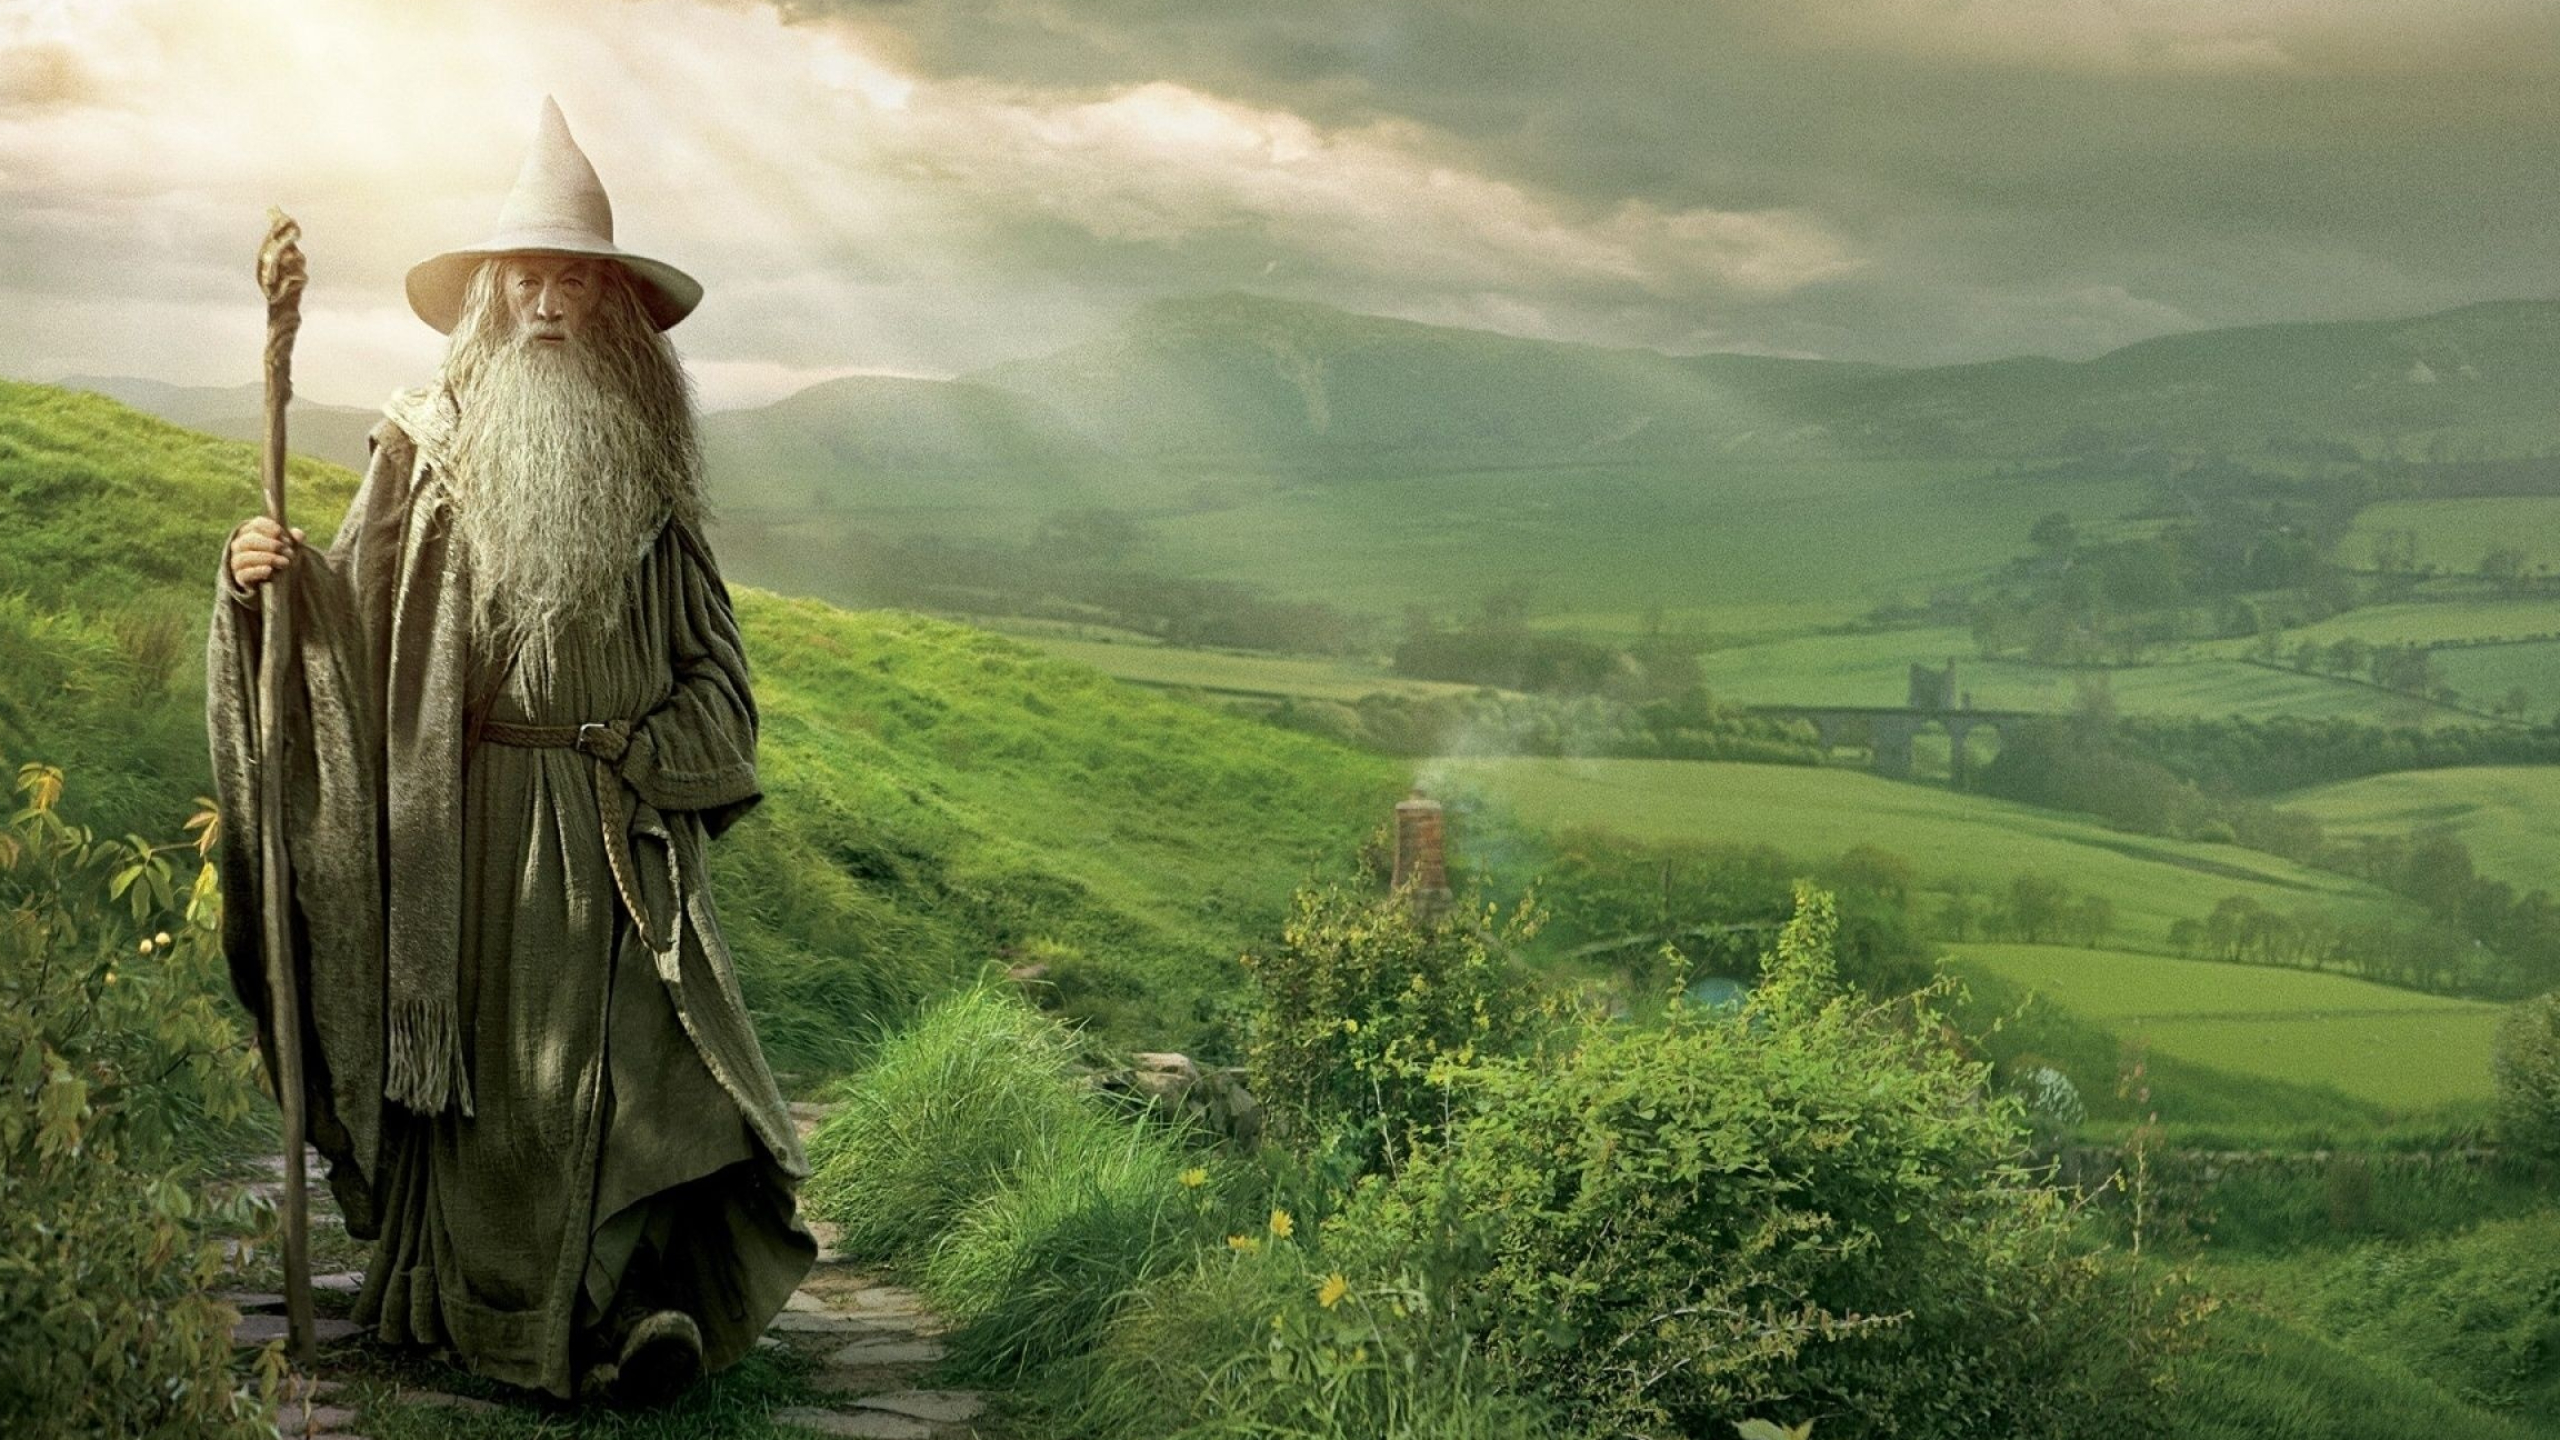 Lord of the Rings Gandalf wallpapers, Stunning visuals, Top-quality images, Desktop background, 2560x1440 HD Desktop